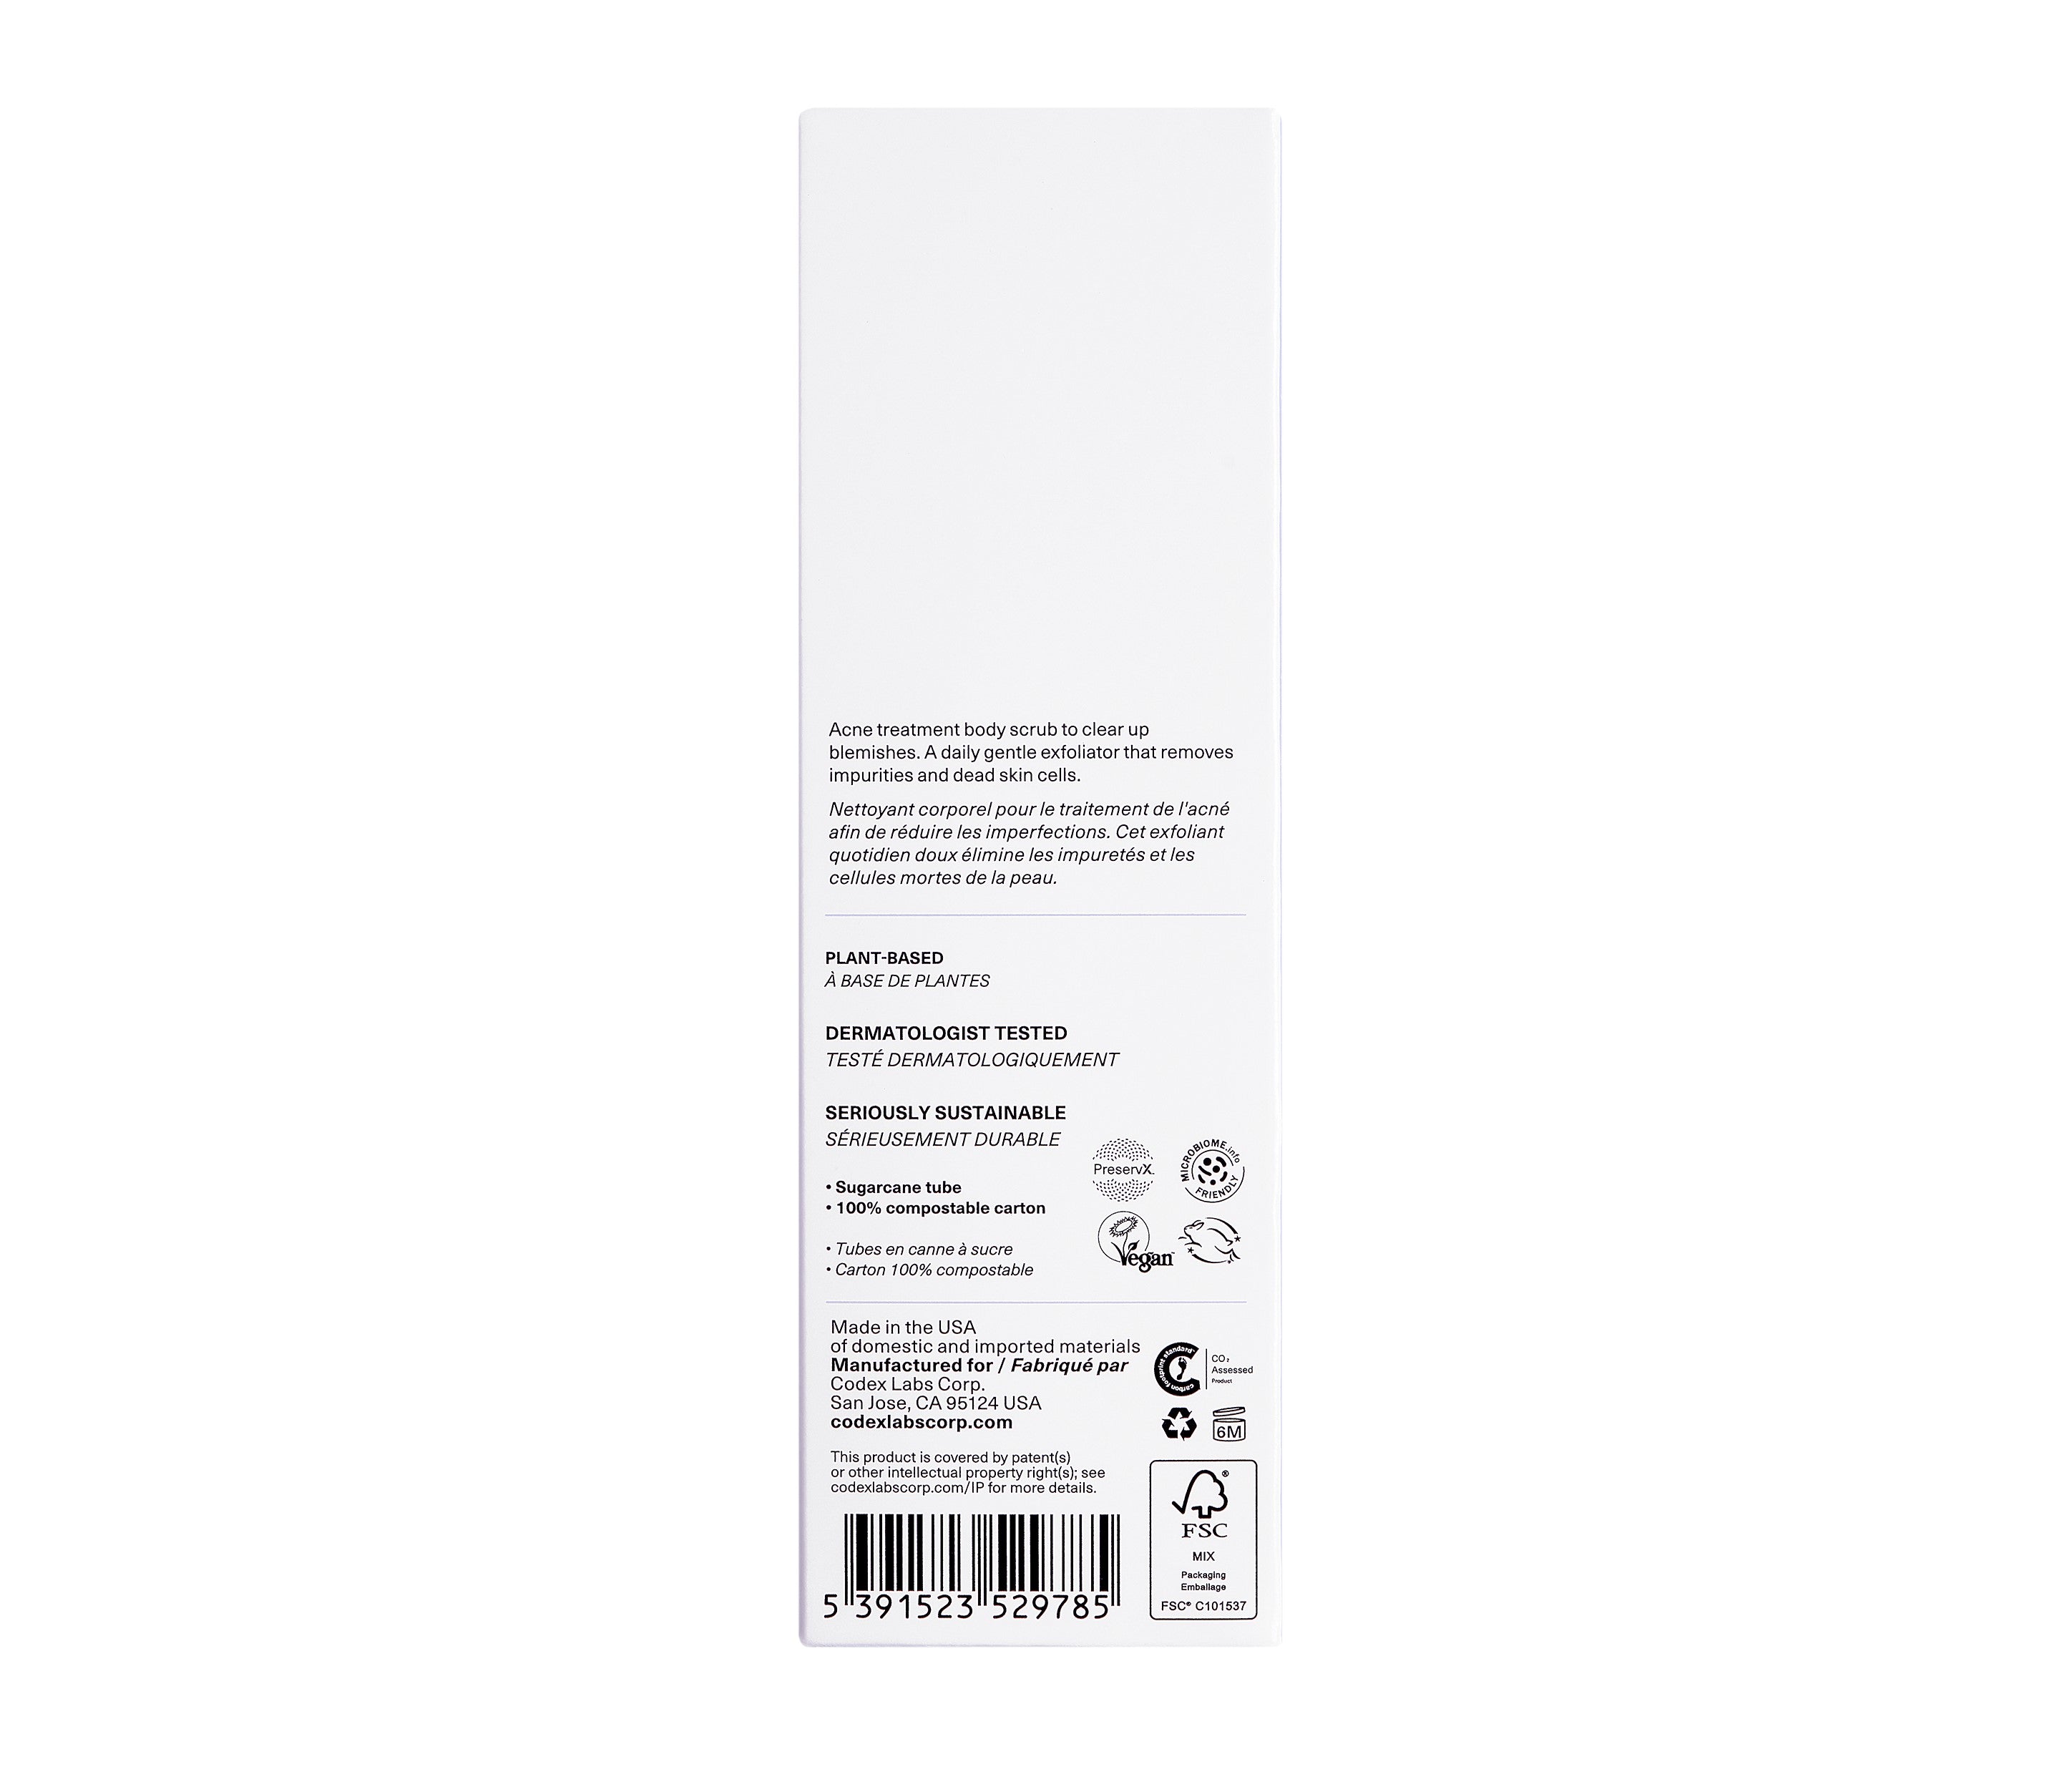 Shaant Hydrating Acne Body Scrub side of carton on white background.